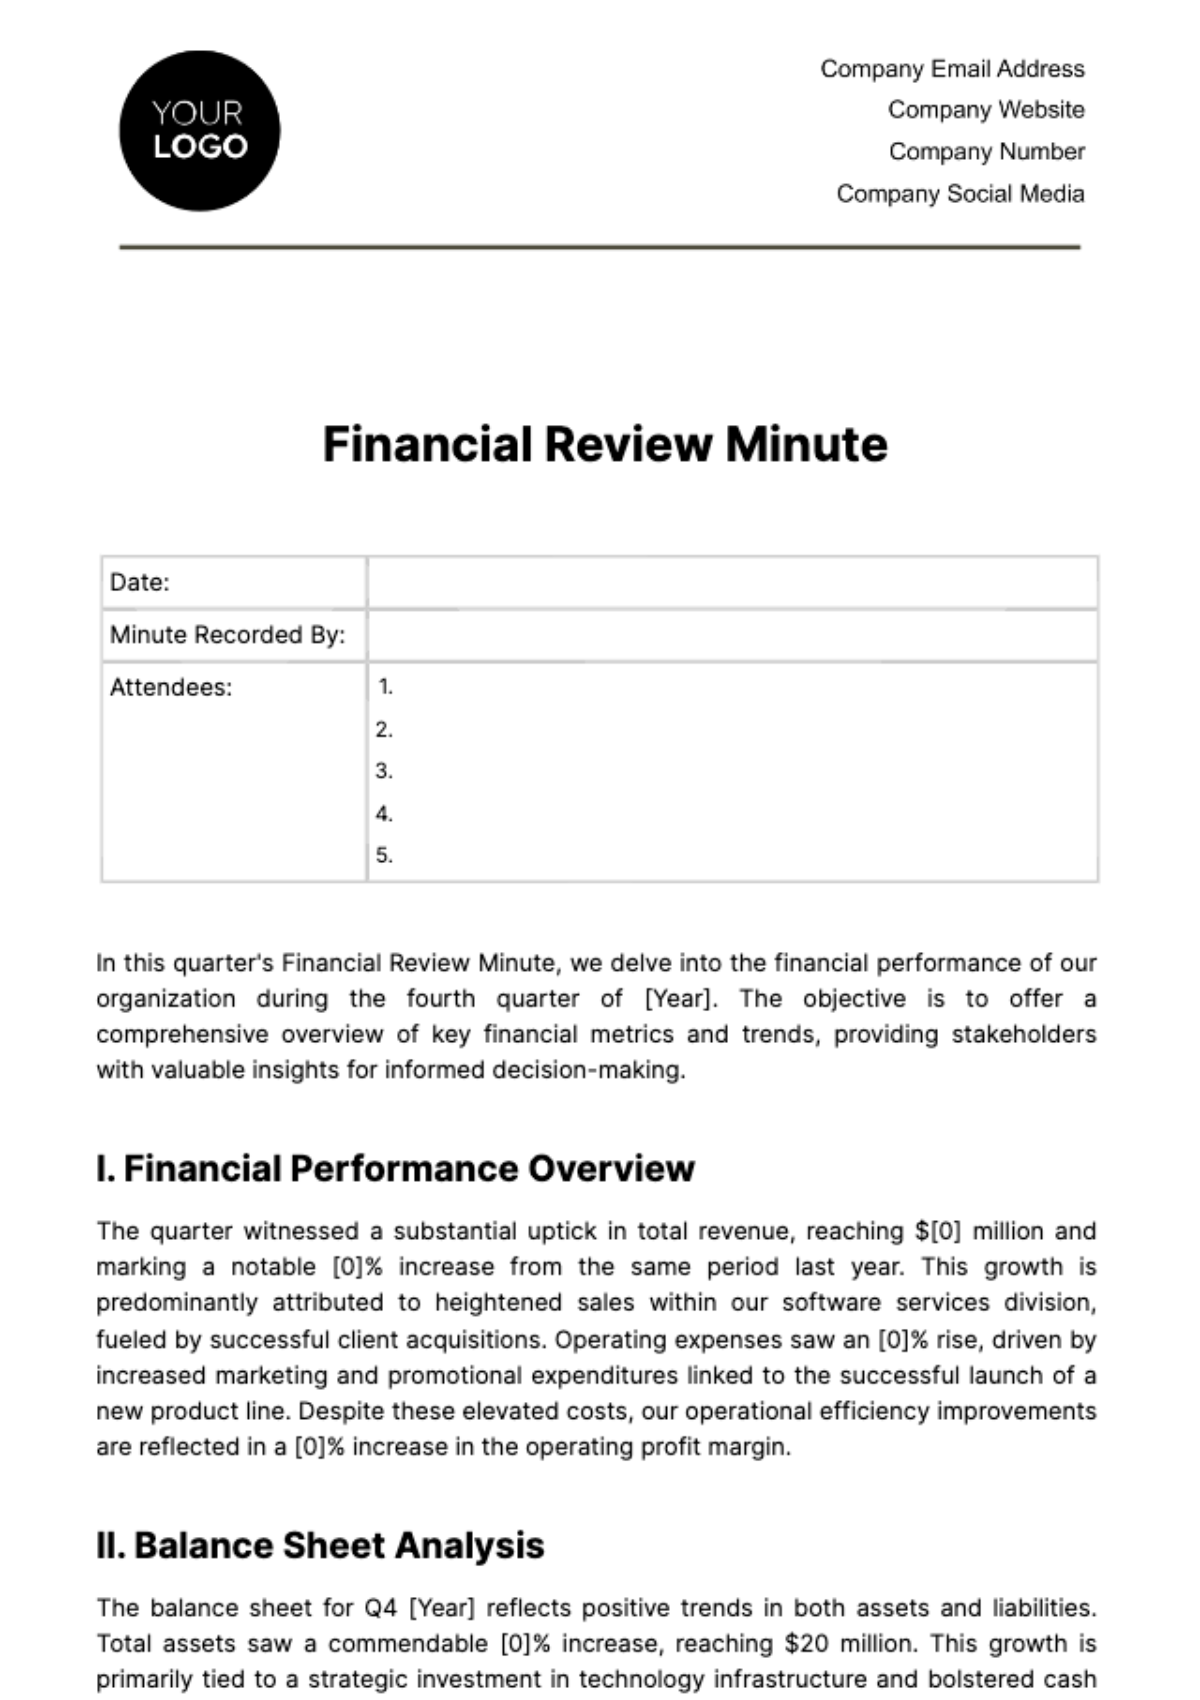 Financial Review Minute Template